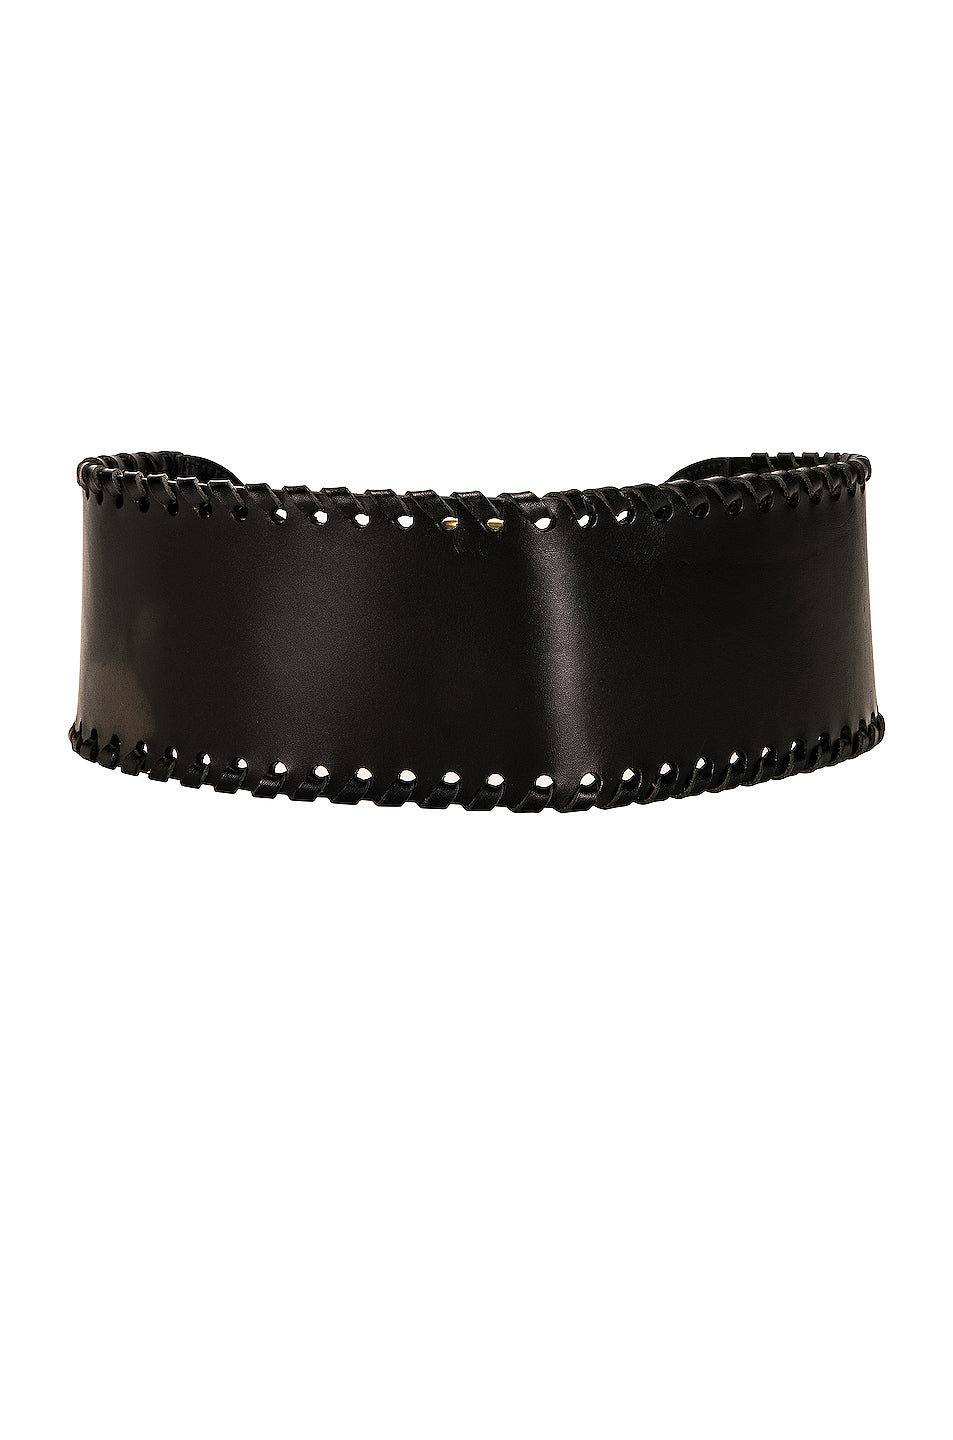 Woma Braided Leather Belt